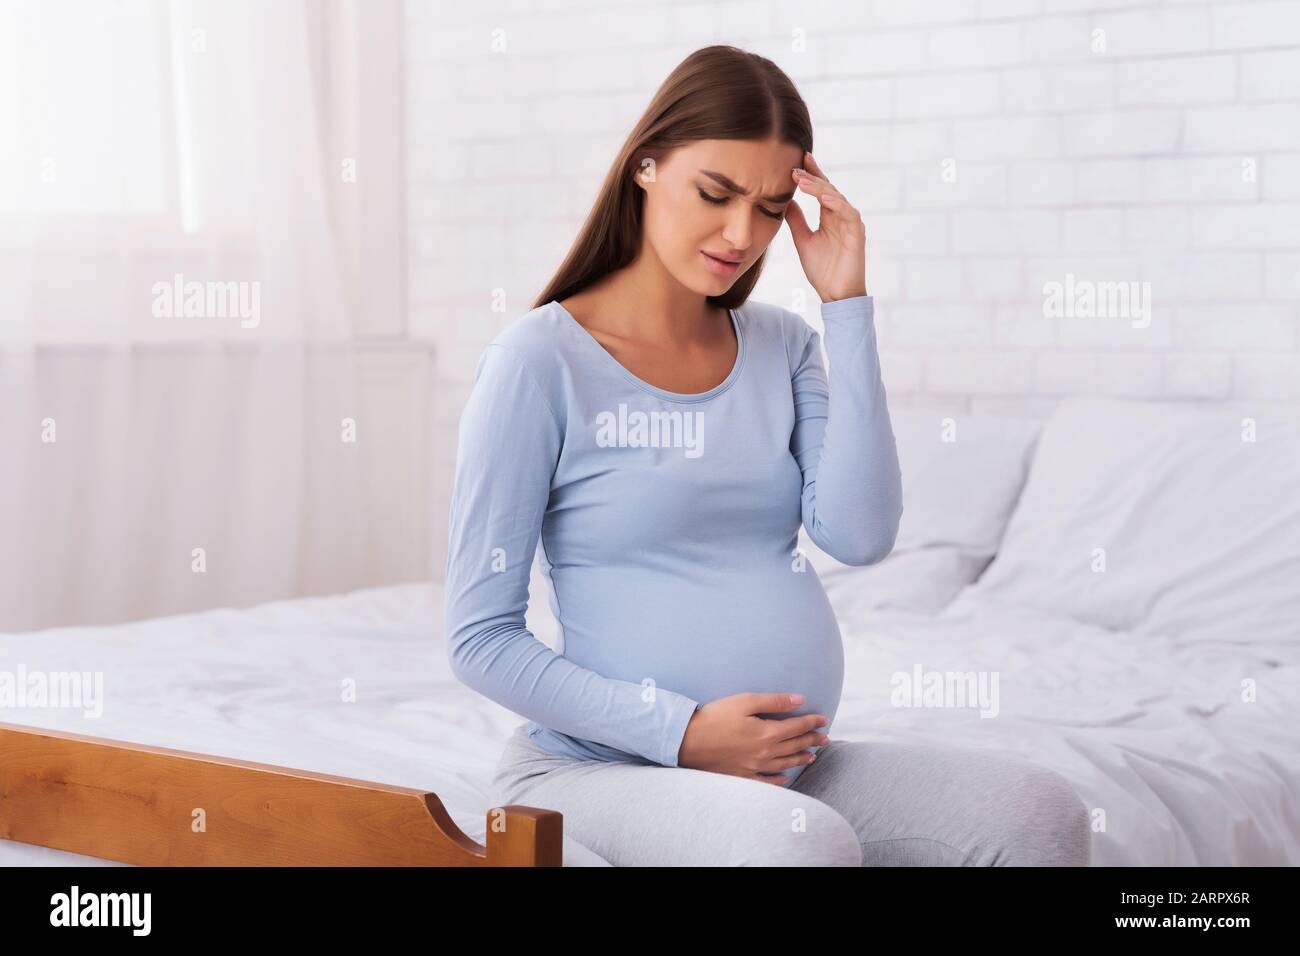 Unhappy Expectant Girl Touching Head And Belly Sitting On Bed Stock Photo